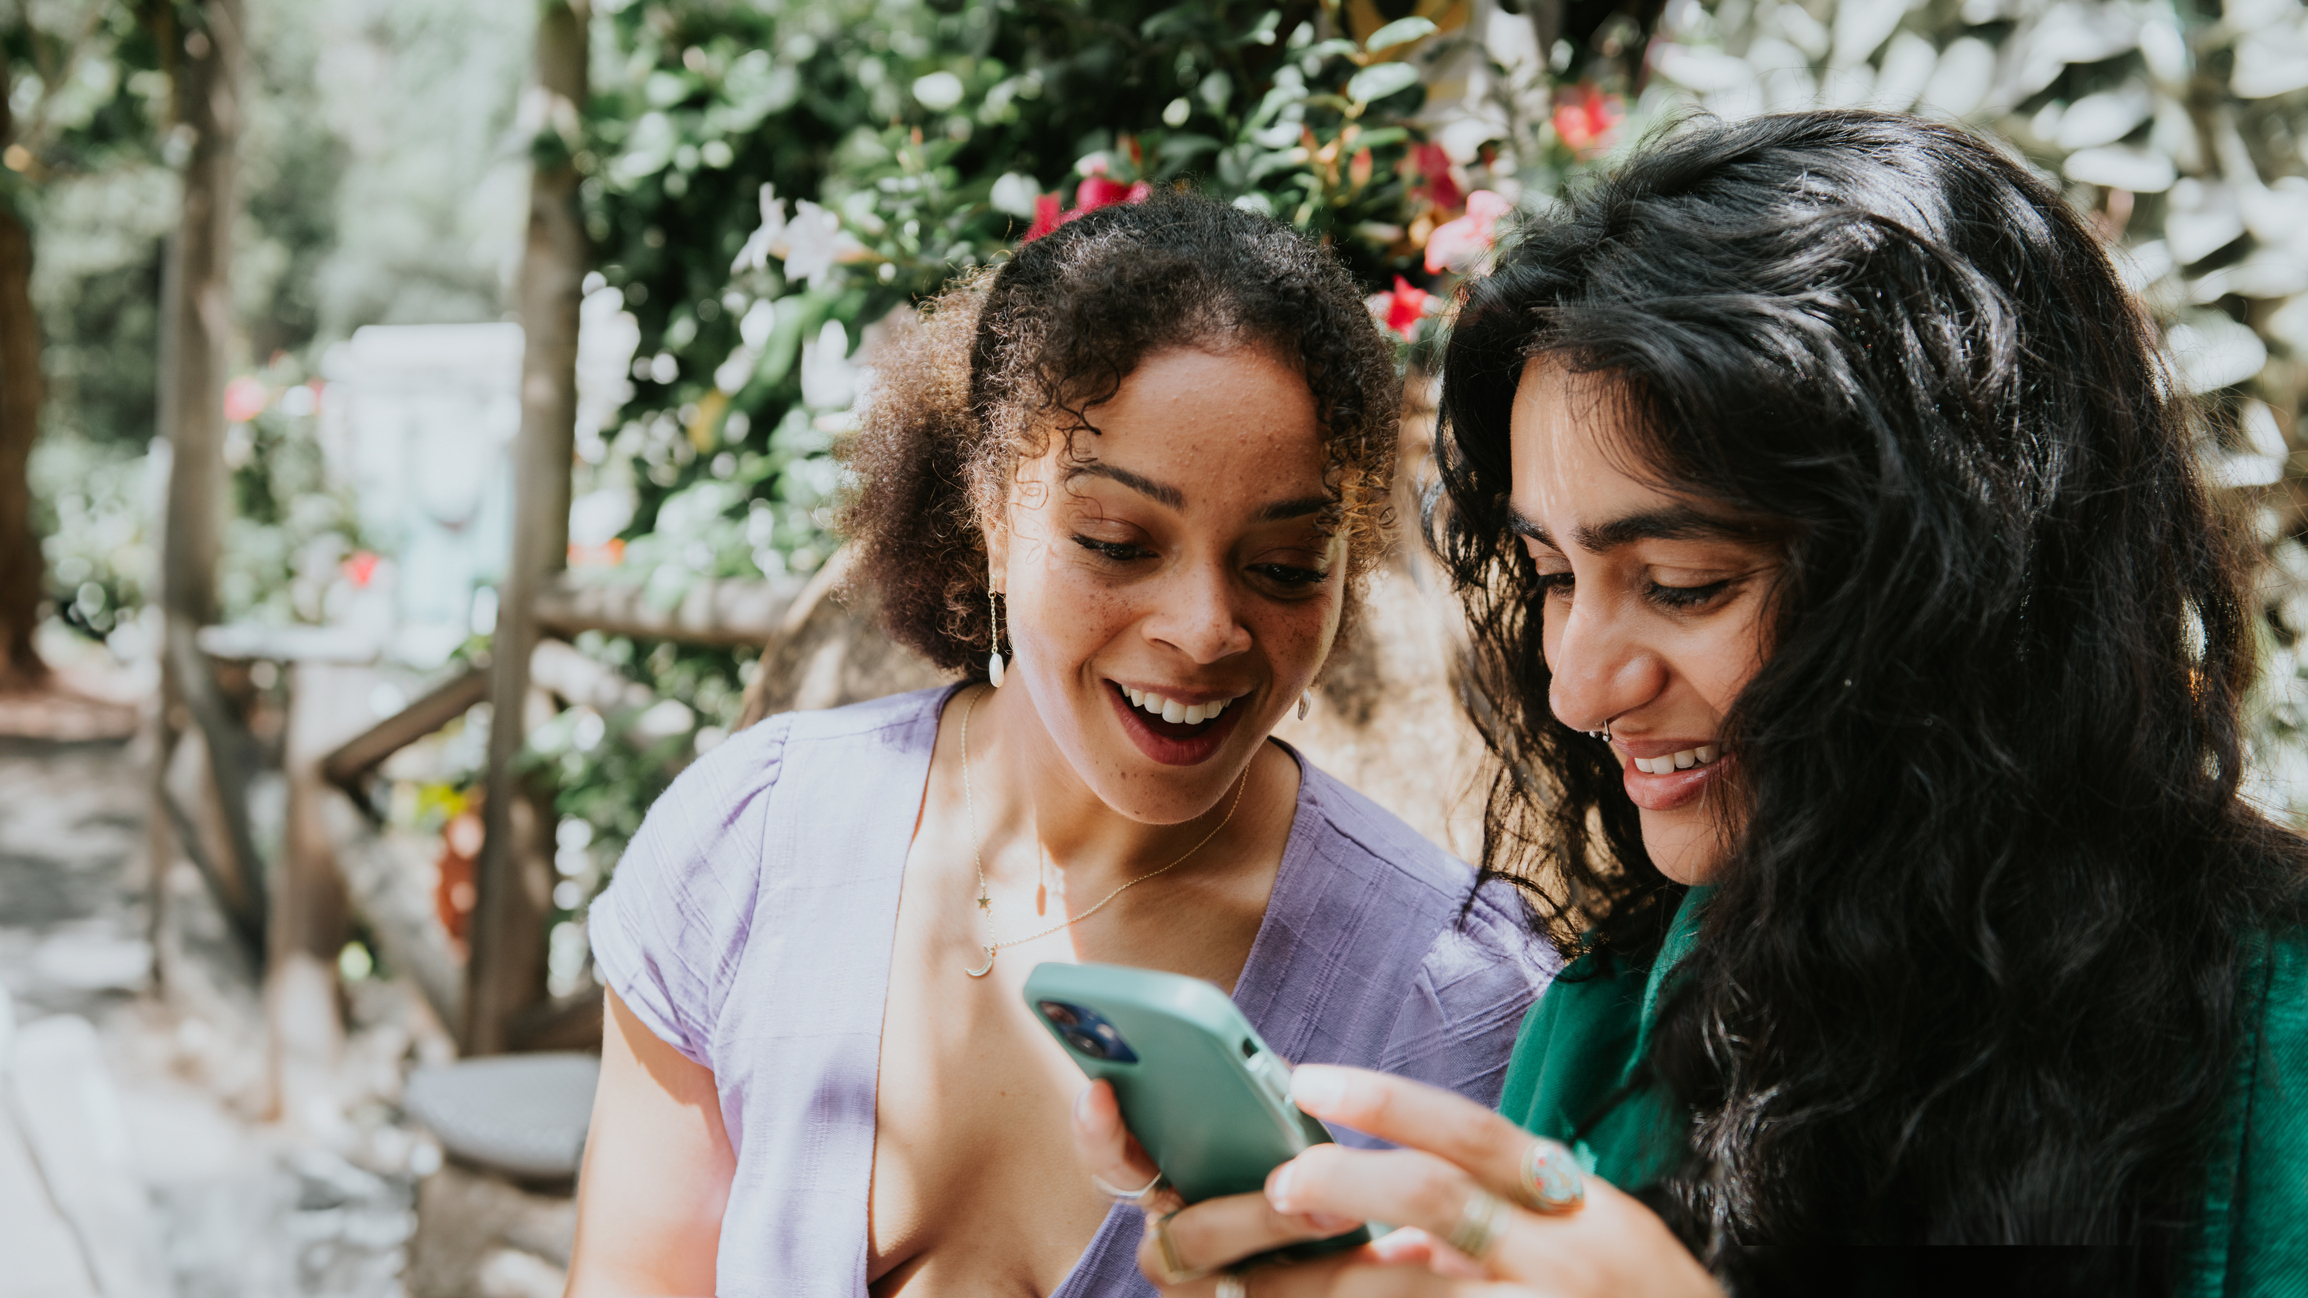 Two women smiling and looking at a smartphone together outdoors